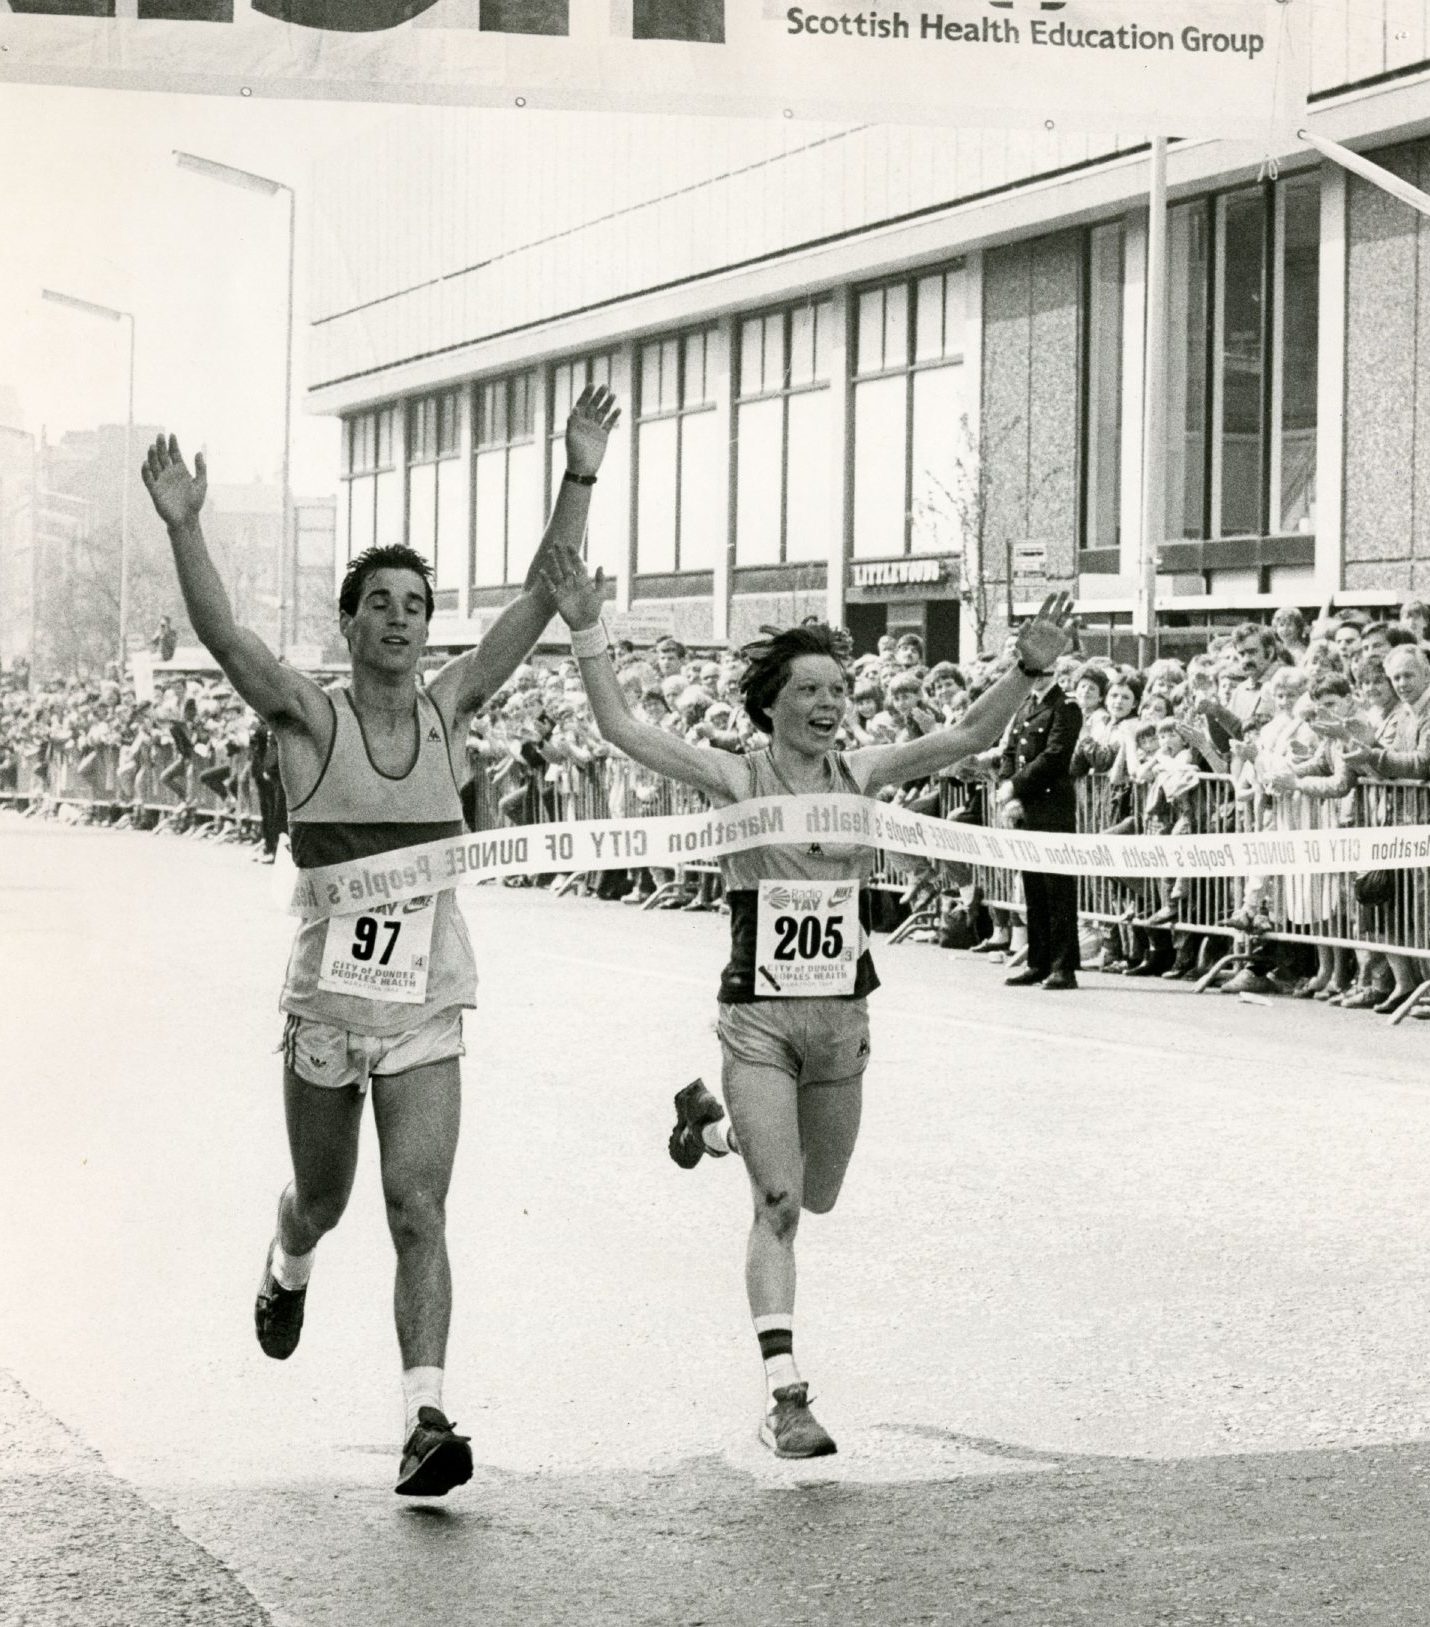 Margaret Baillie coming over the finish line as the fastest woman in the 1984 Dundee marathon